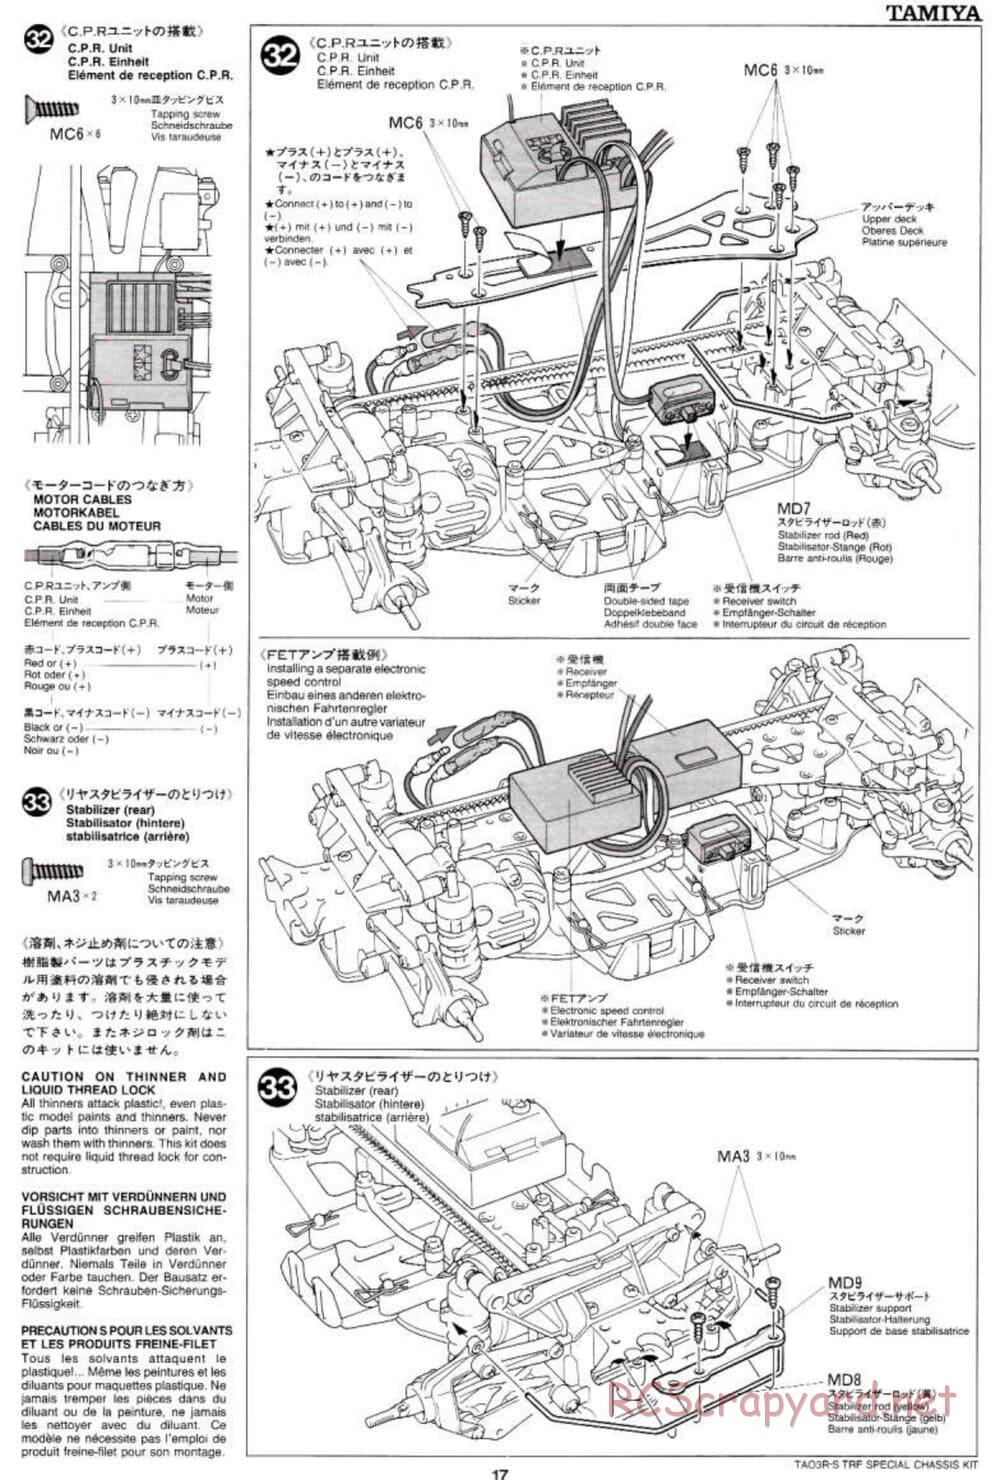 Tamiya - TA-03RS TRF Special Chassis - Manual - Page 17